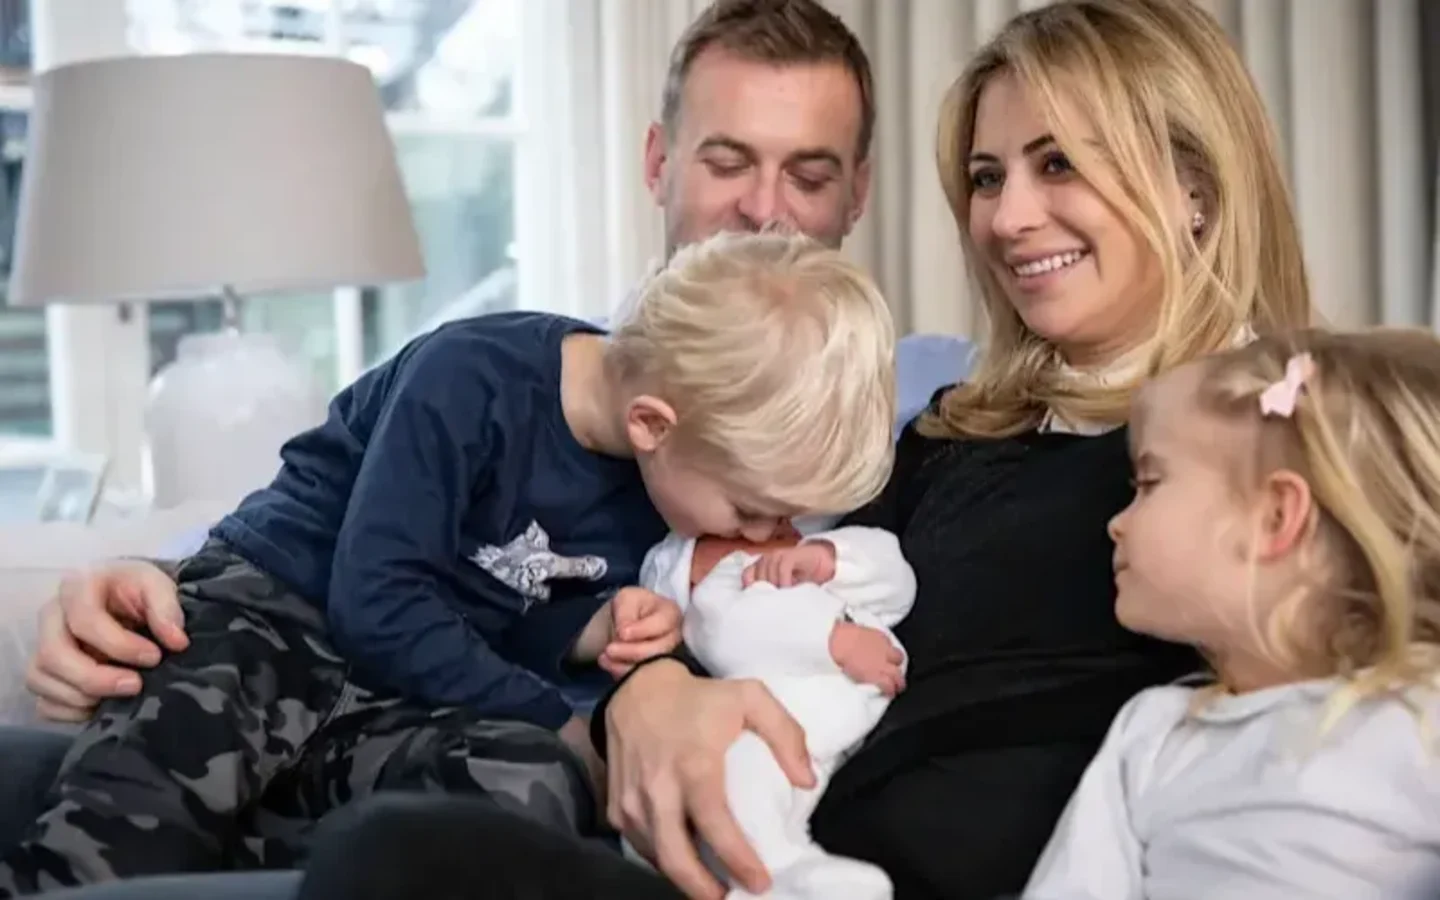 Holly Branson sitting down holding newborn baby Lola, surrounded by her husband Freddie and twins Artie and Etta